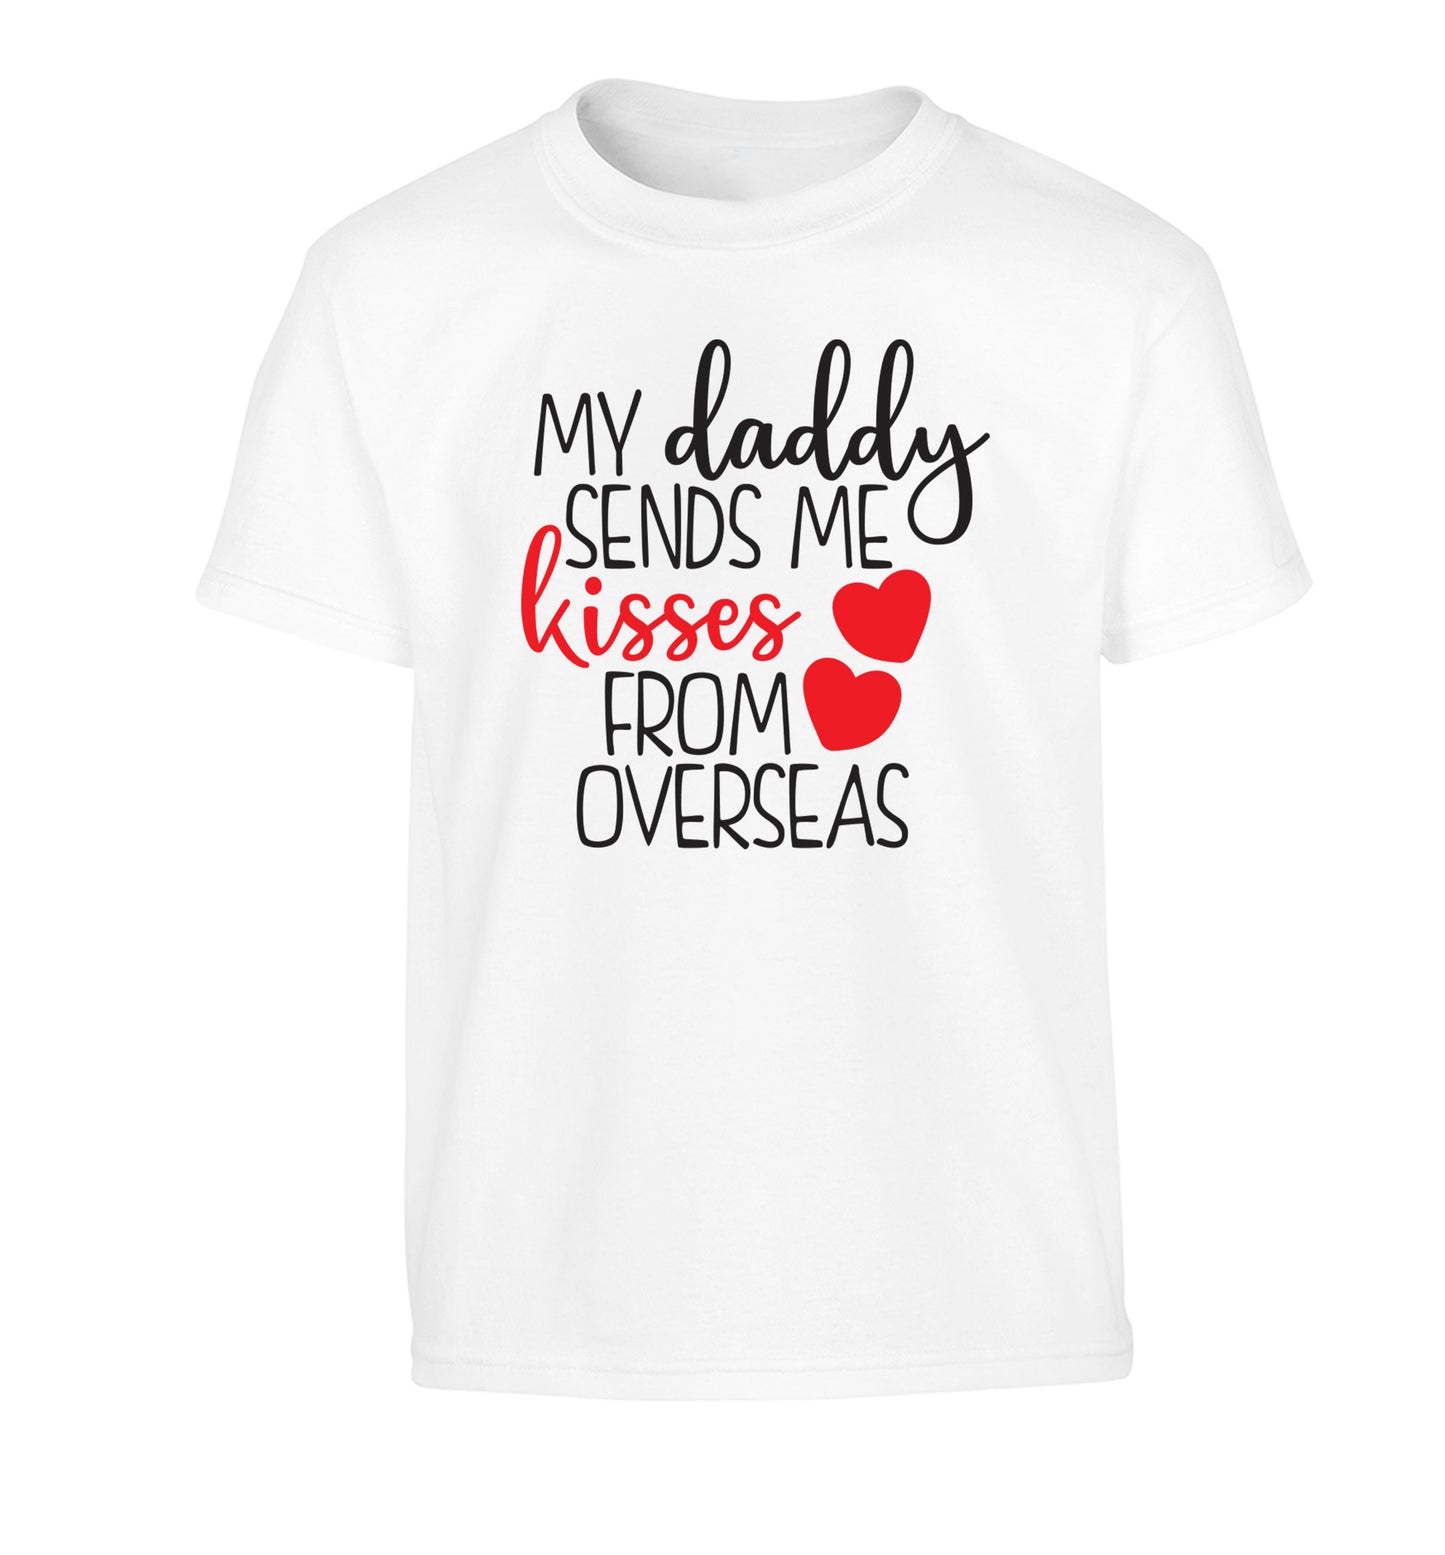 My daddy sends me kisses from overseas Children's white Tshirt 12-13 Years